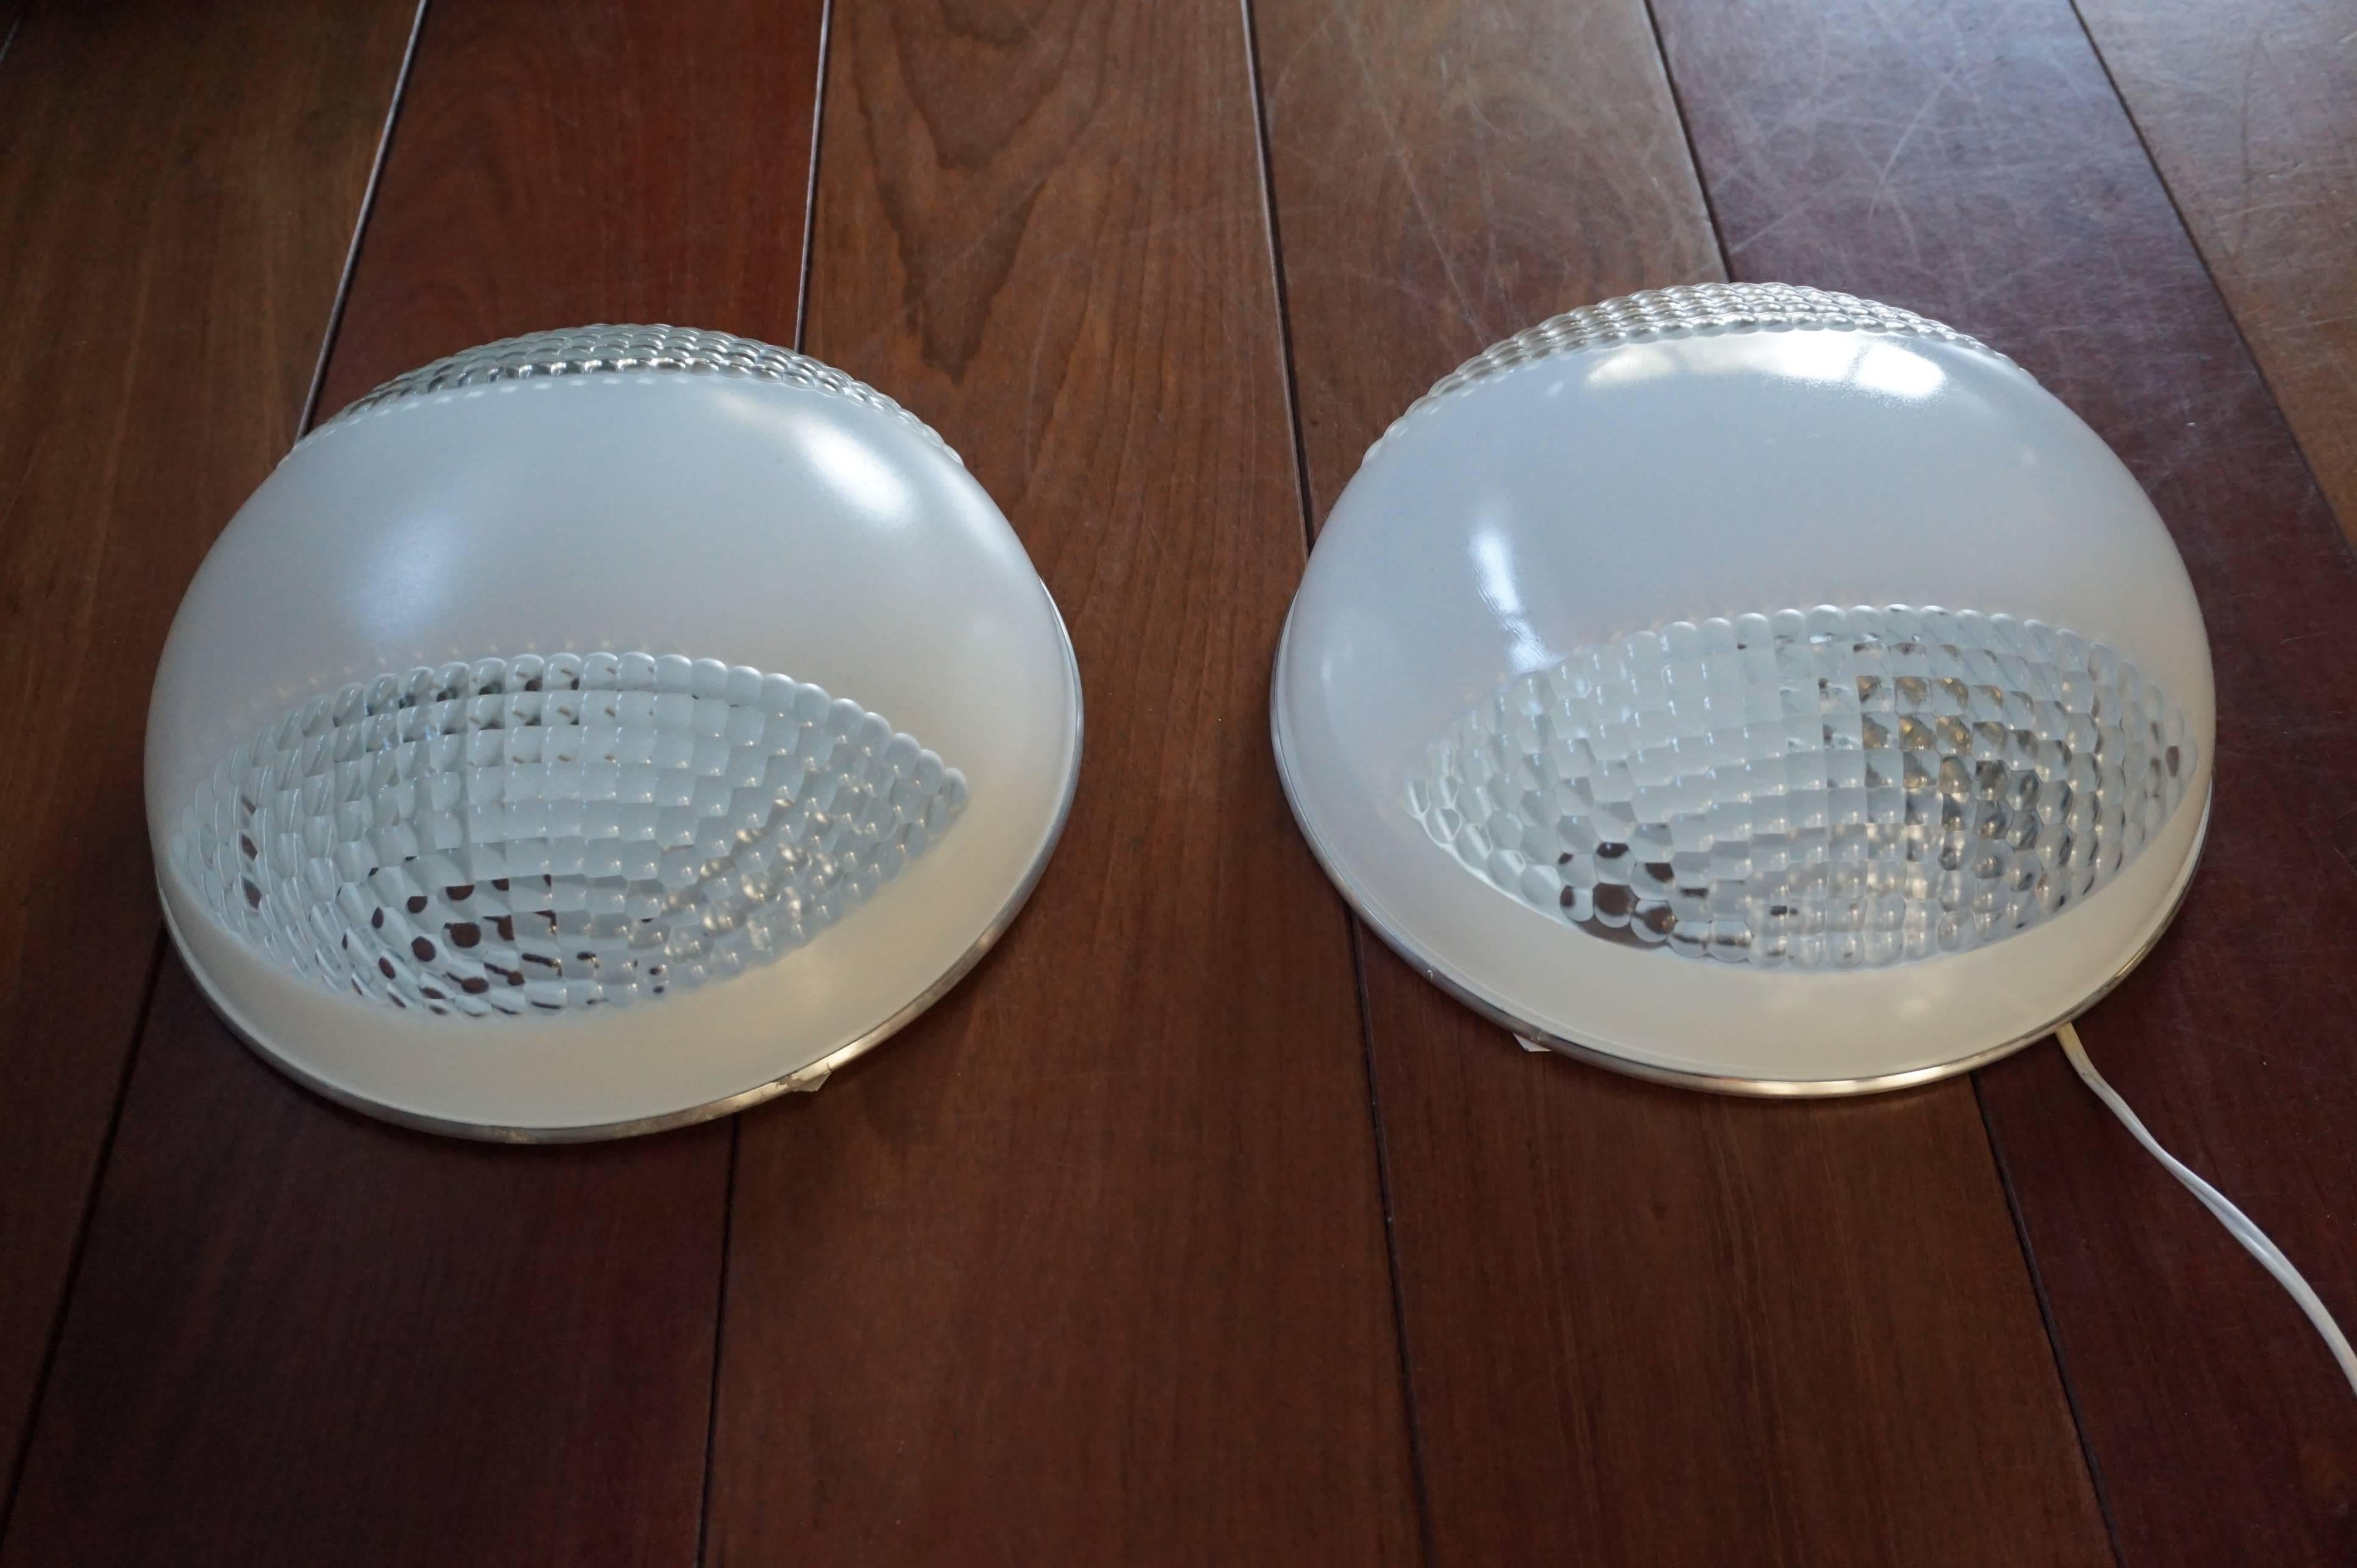 For the collectors and interior designers.

They say that there is a first time for everything, but never had we expected to find an unused and rare pair of Holophane flush mounts from the midcentury modern era. The sockets of these Holophane